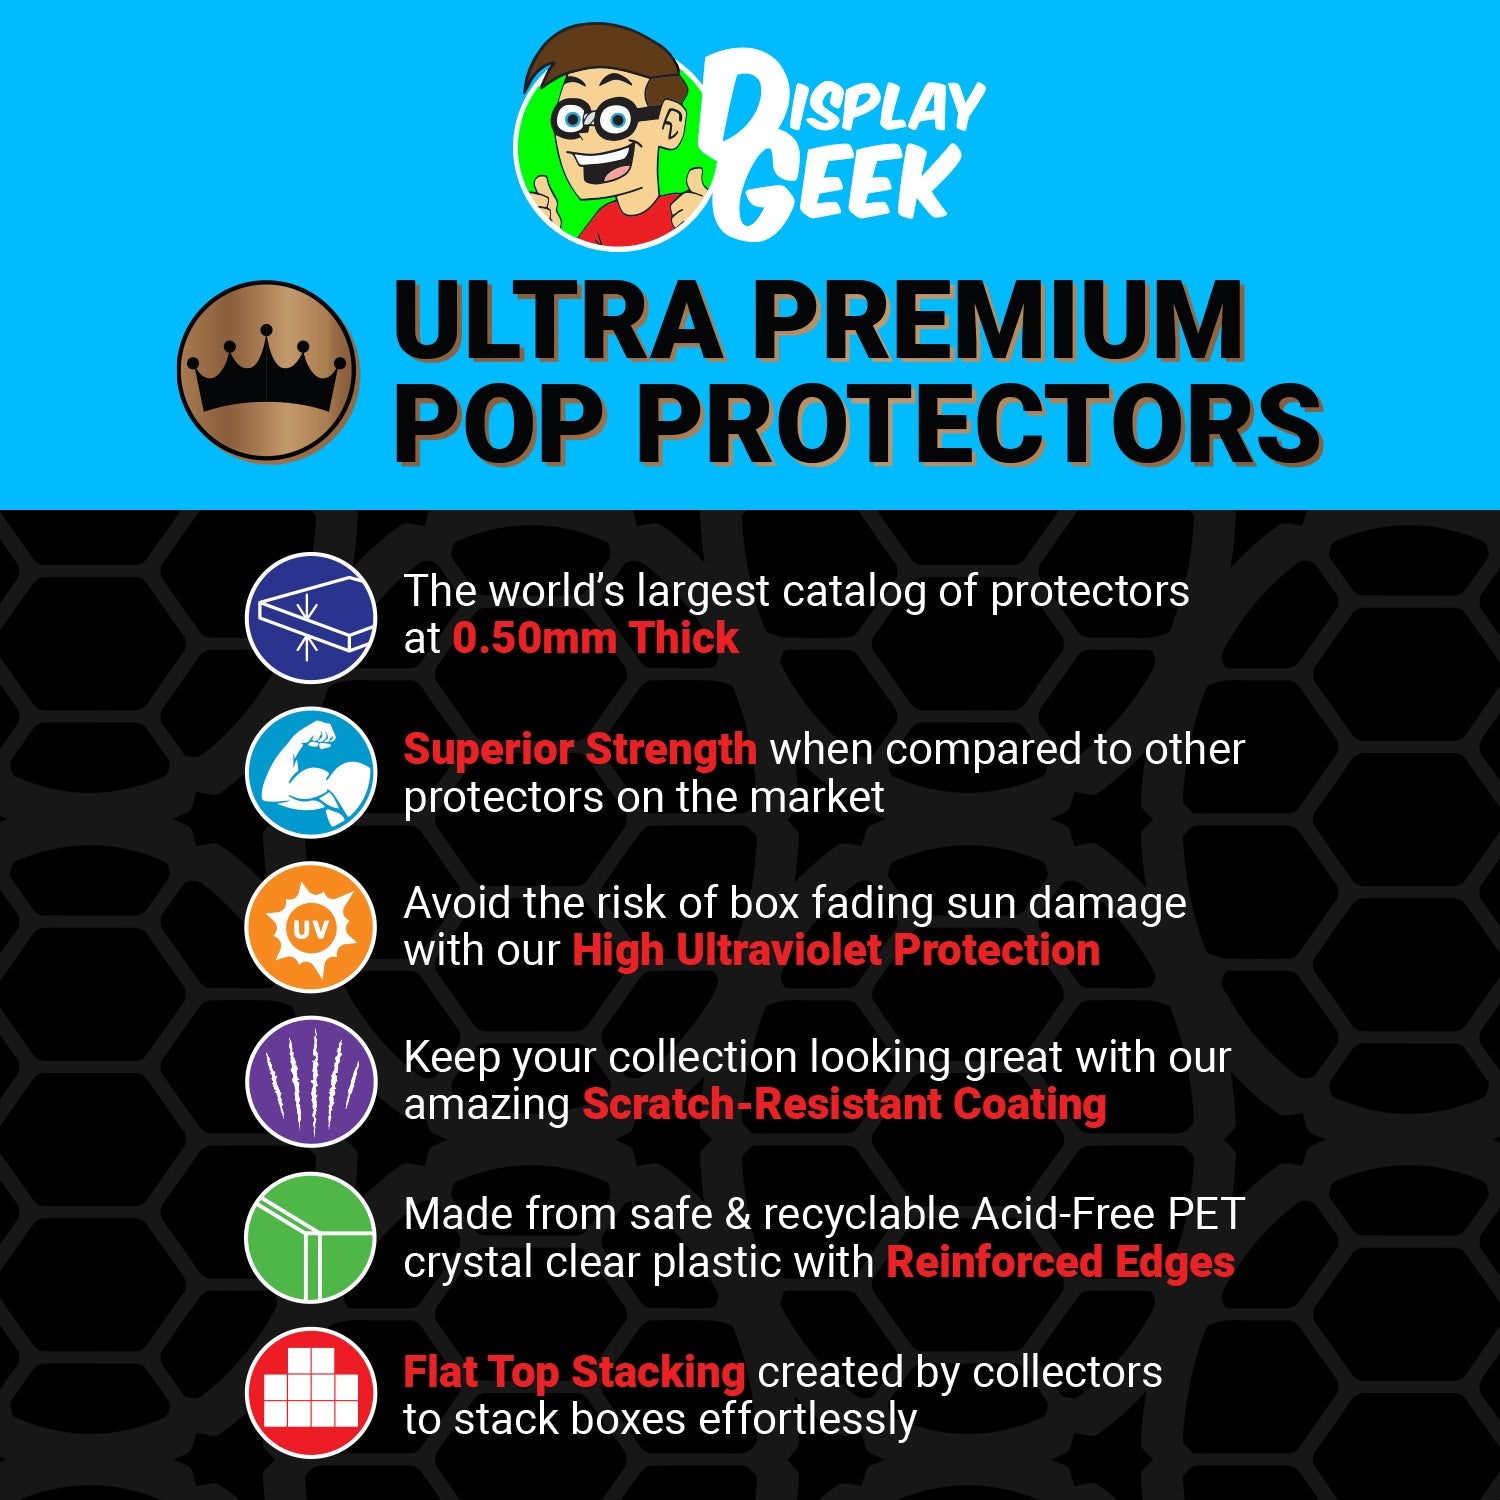 Pop Protector for Bitty Pop Outer Box Funko Pop - PPG Pop Protector Guide Search Created by Display Geek